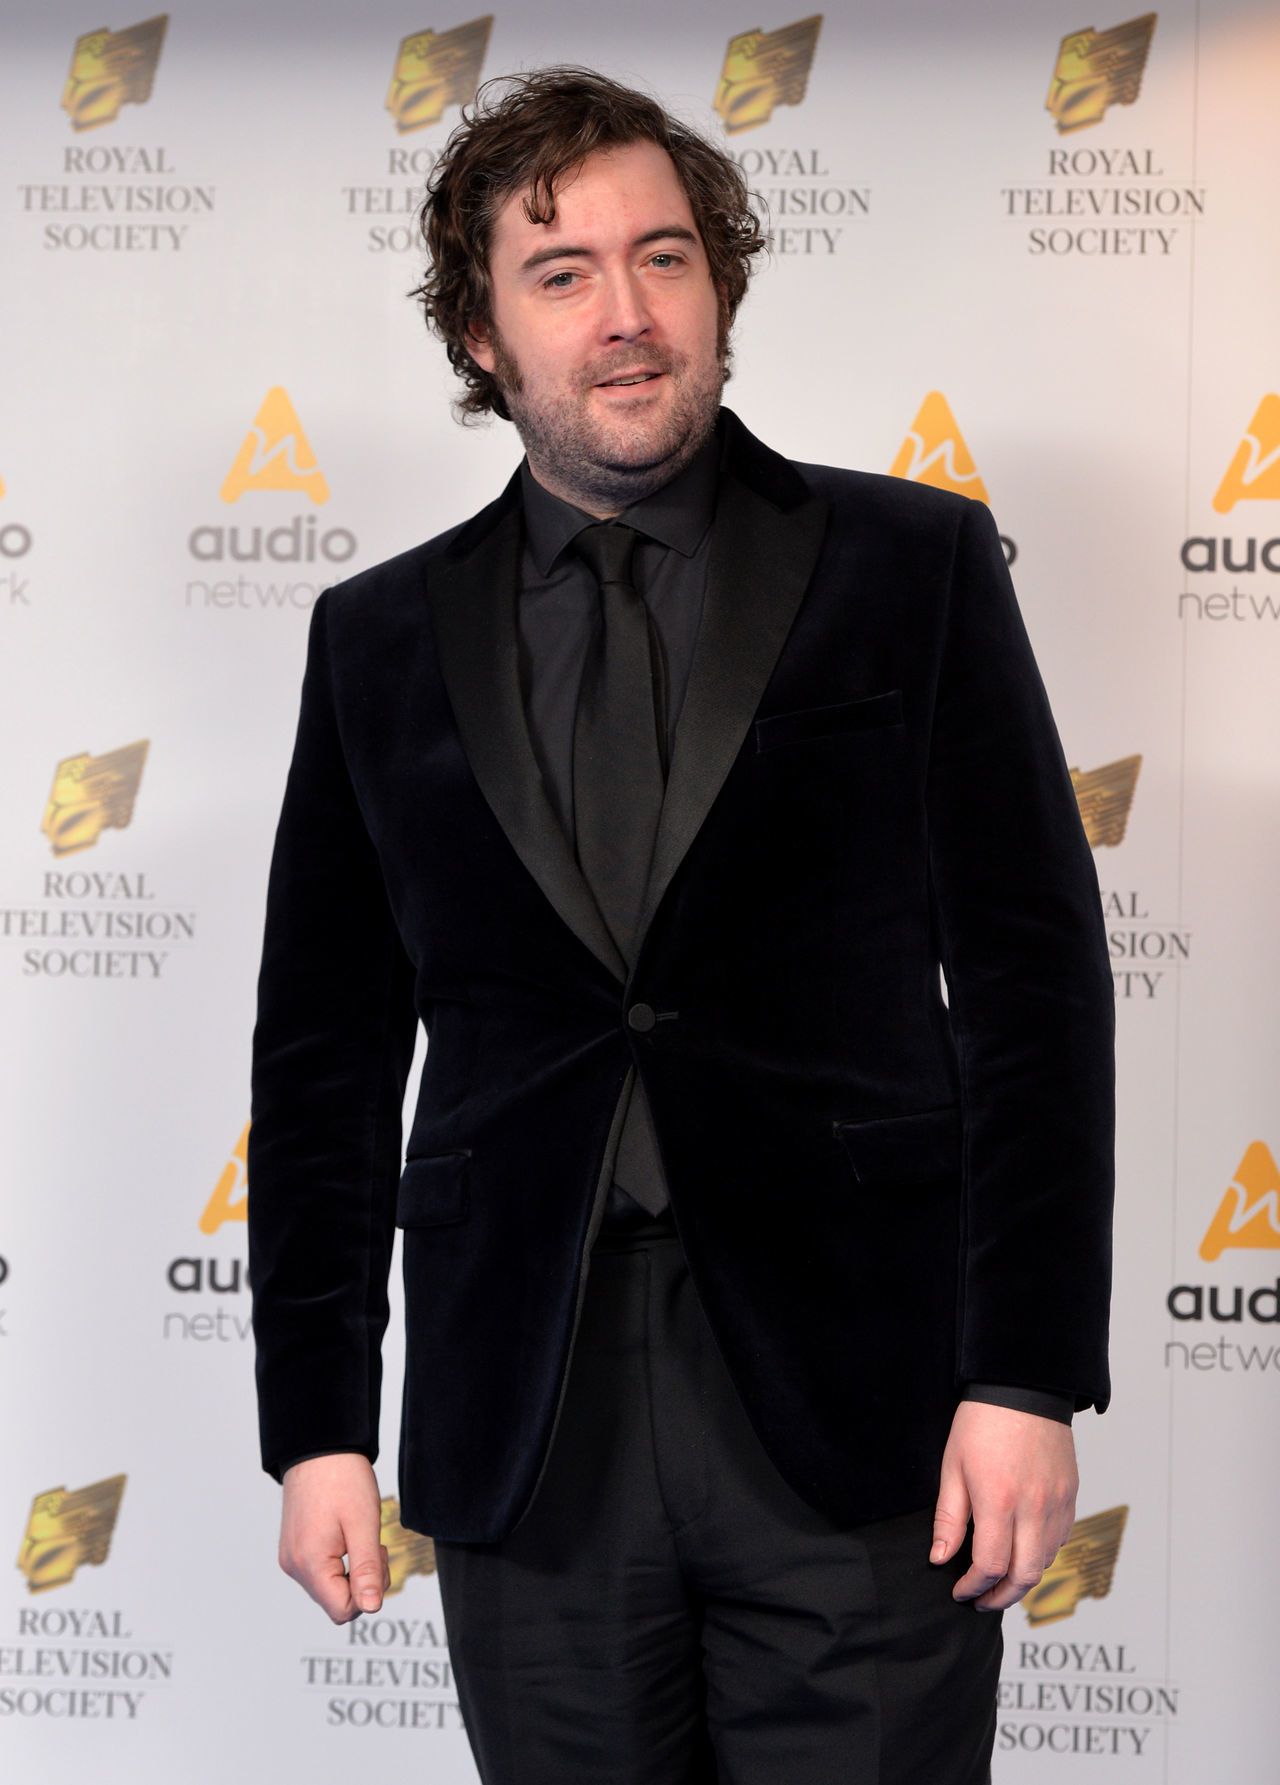 Nick Helm praised comedians who did gigs in car parks